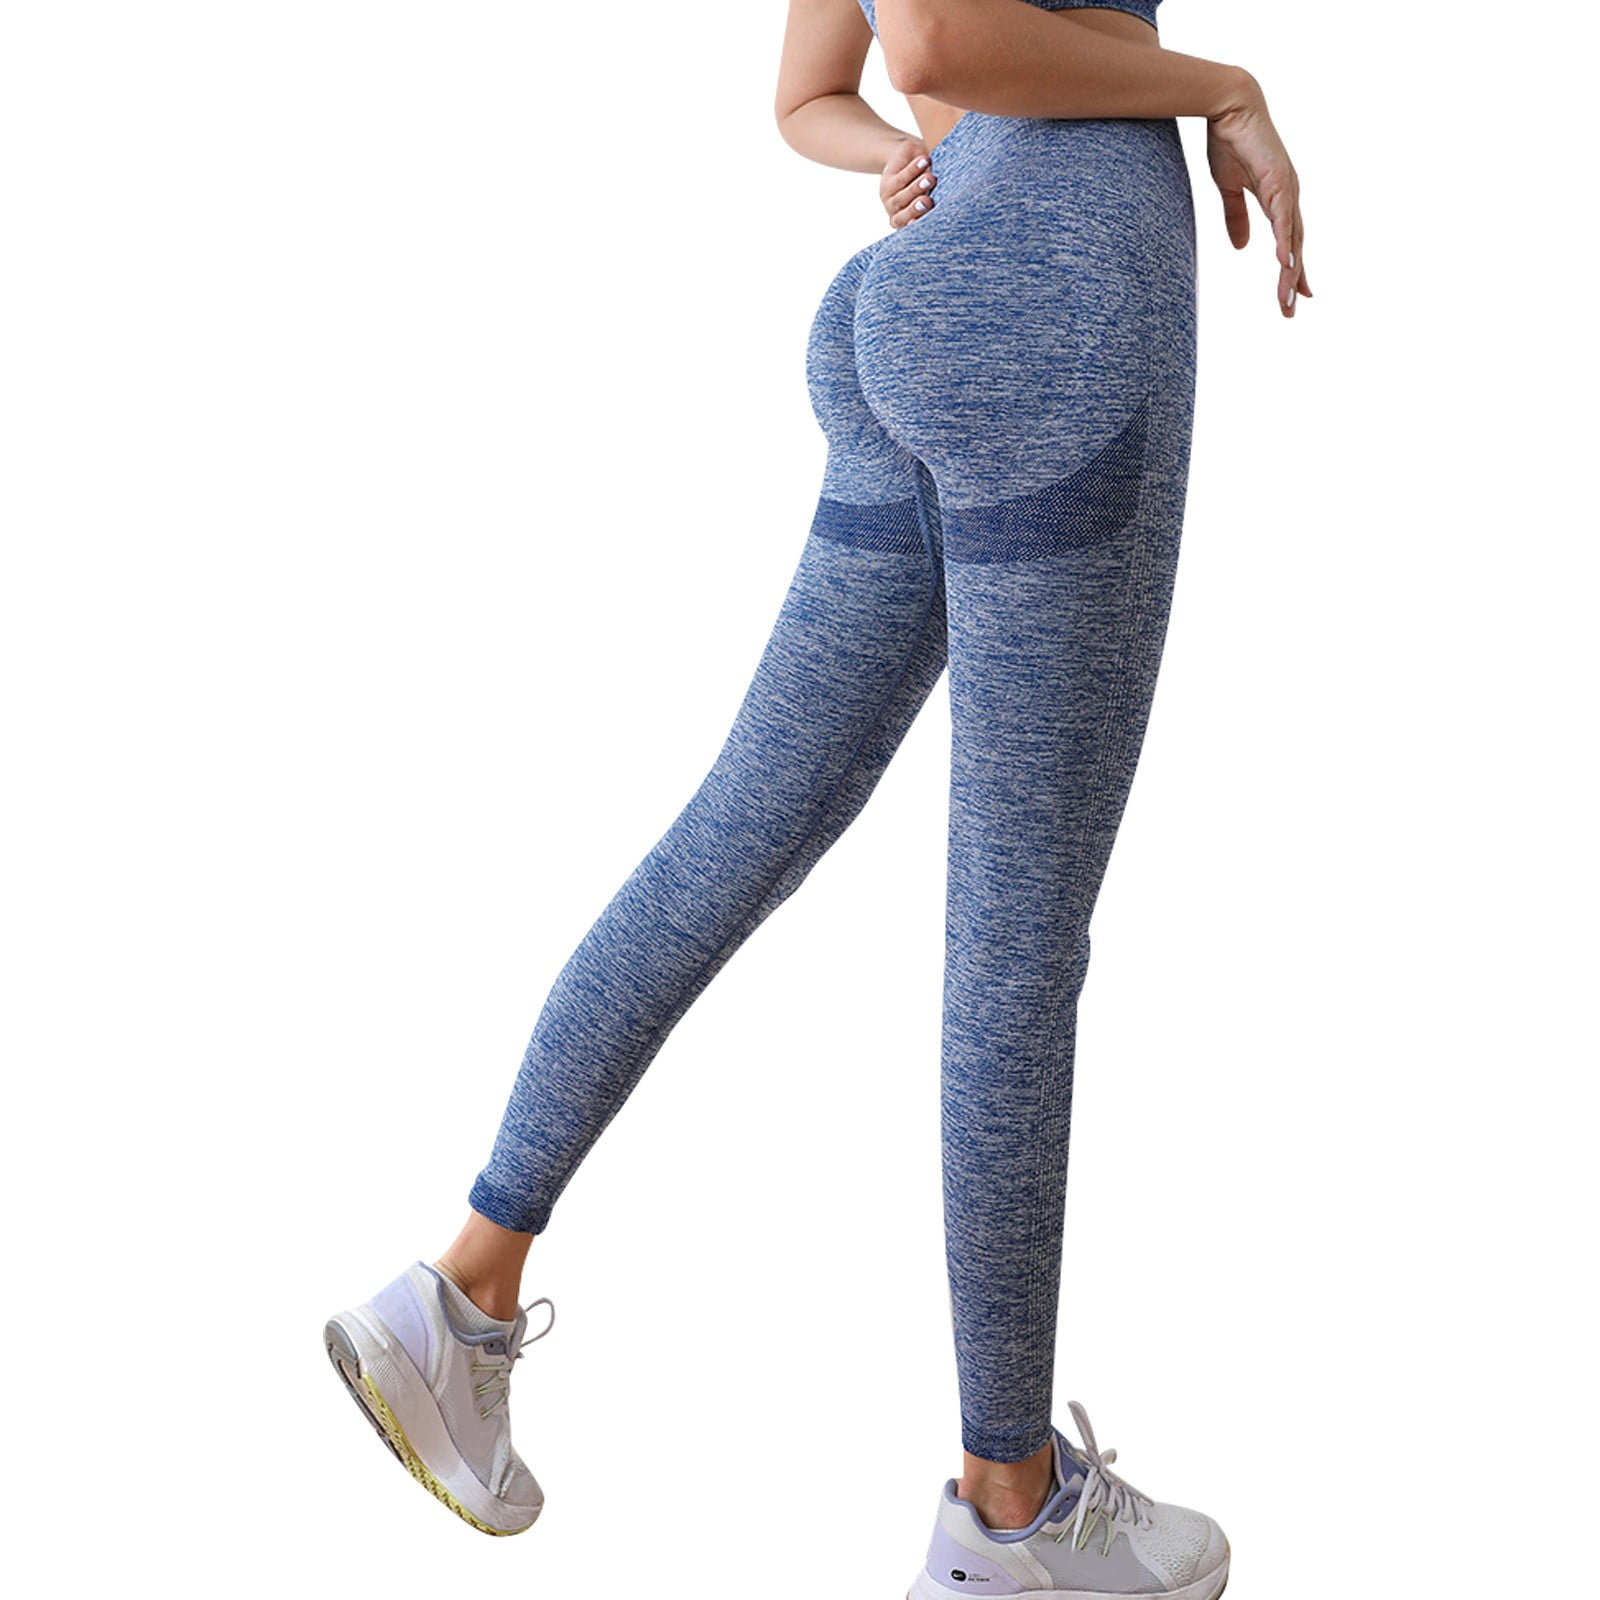 Extra Long Yoga Pants Womens Fashion Exercise Peach Fitness Pants Lifting Yoga  Pants Womens's Bottom Tights Active Leggings for Womens with Pocket 